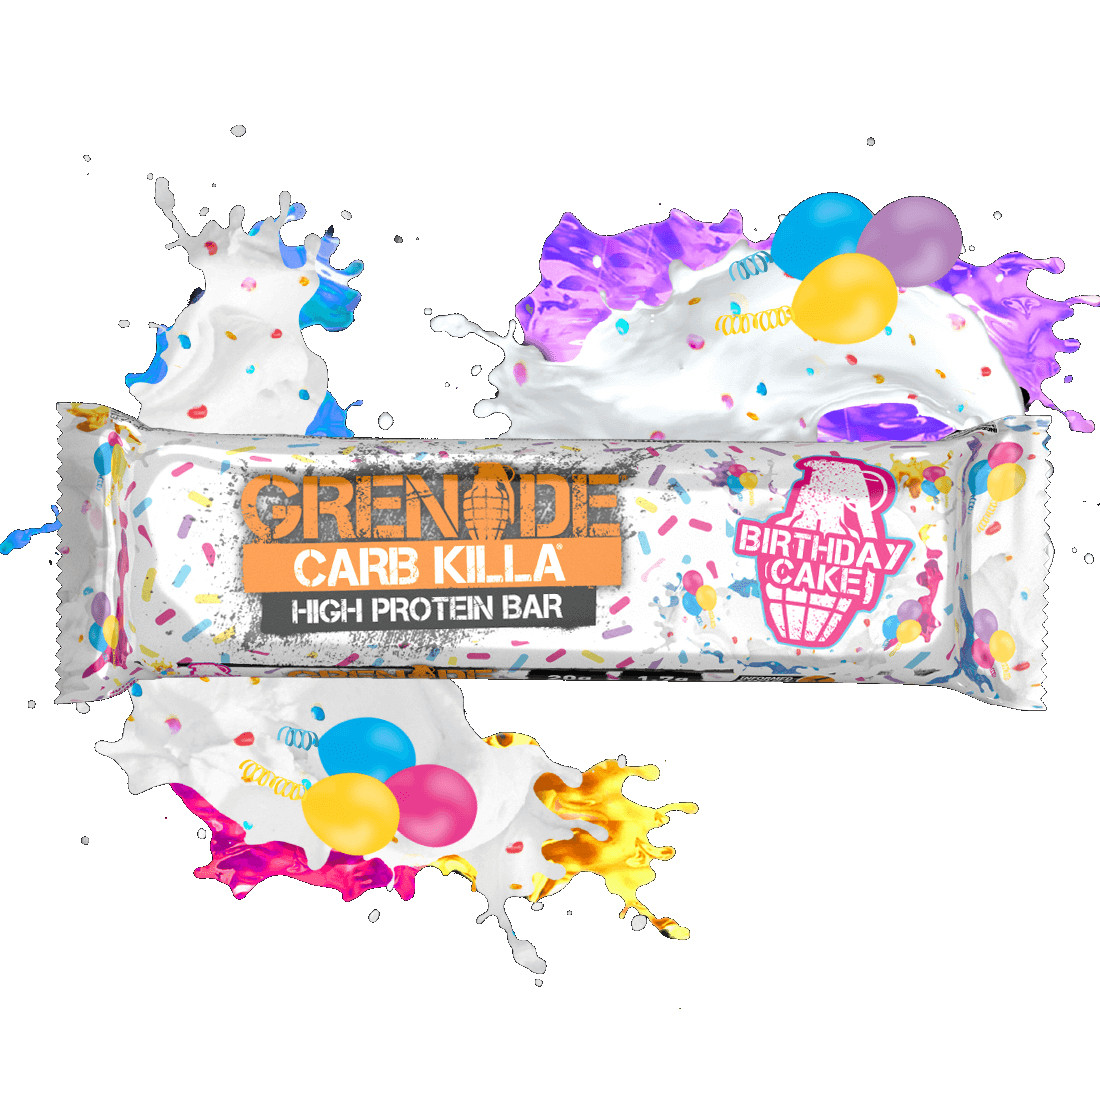 Calories In Birthday Cake
 Calories in Grenade Carb Killa High Protein Bar Birthday Cake